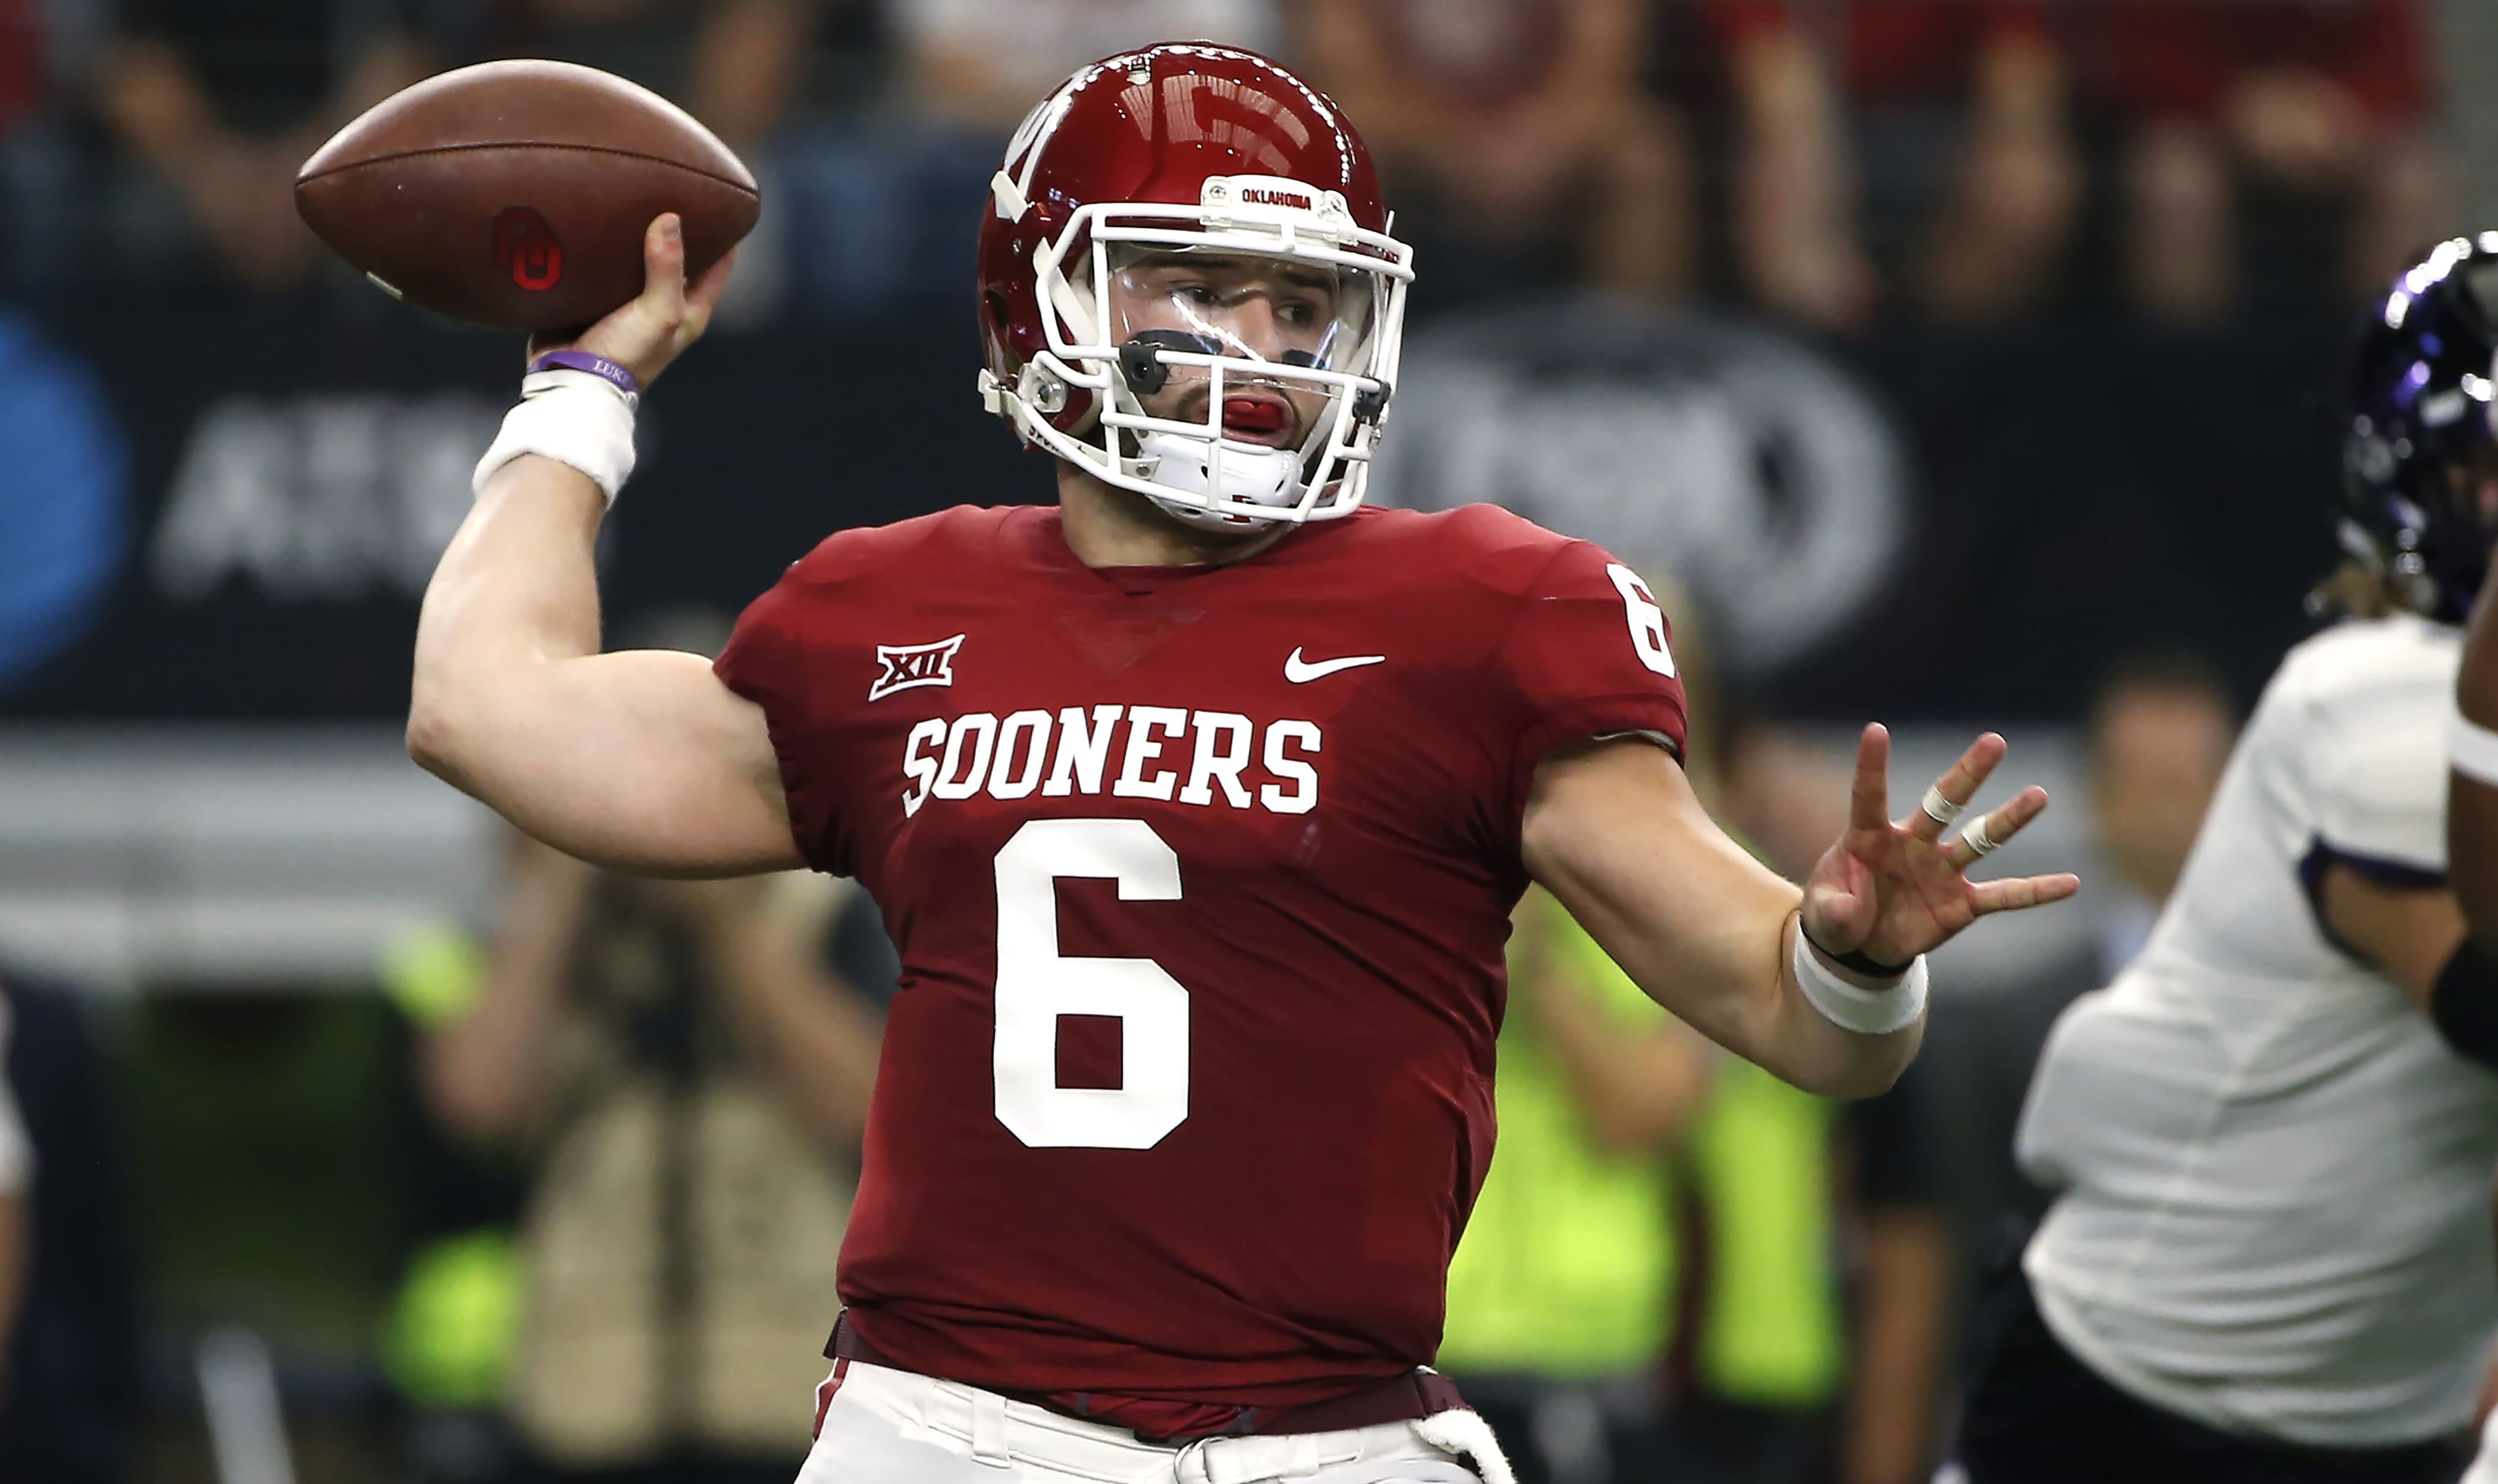 Oklahoma quarterback Baker Mayfield has chance in NFL